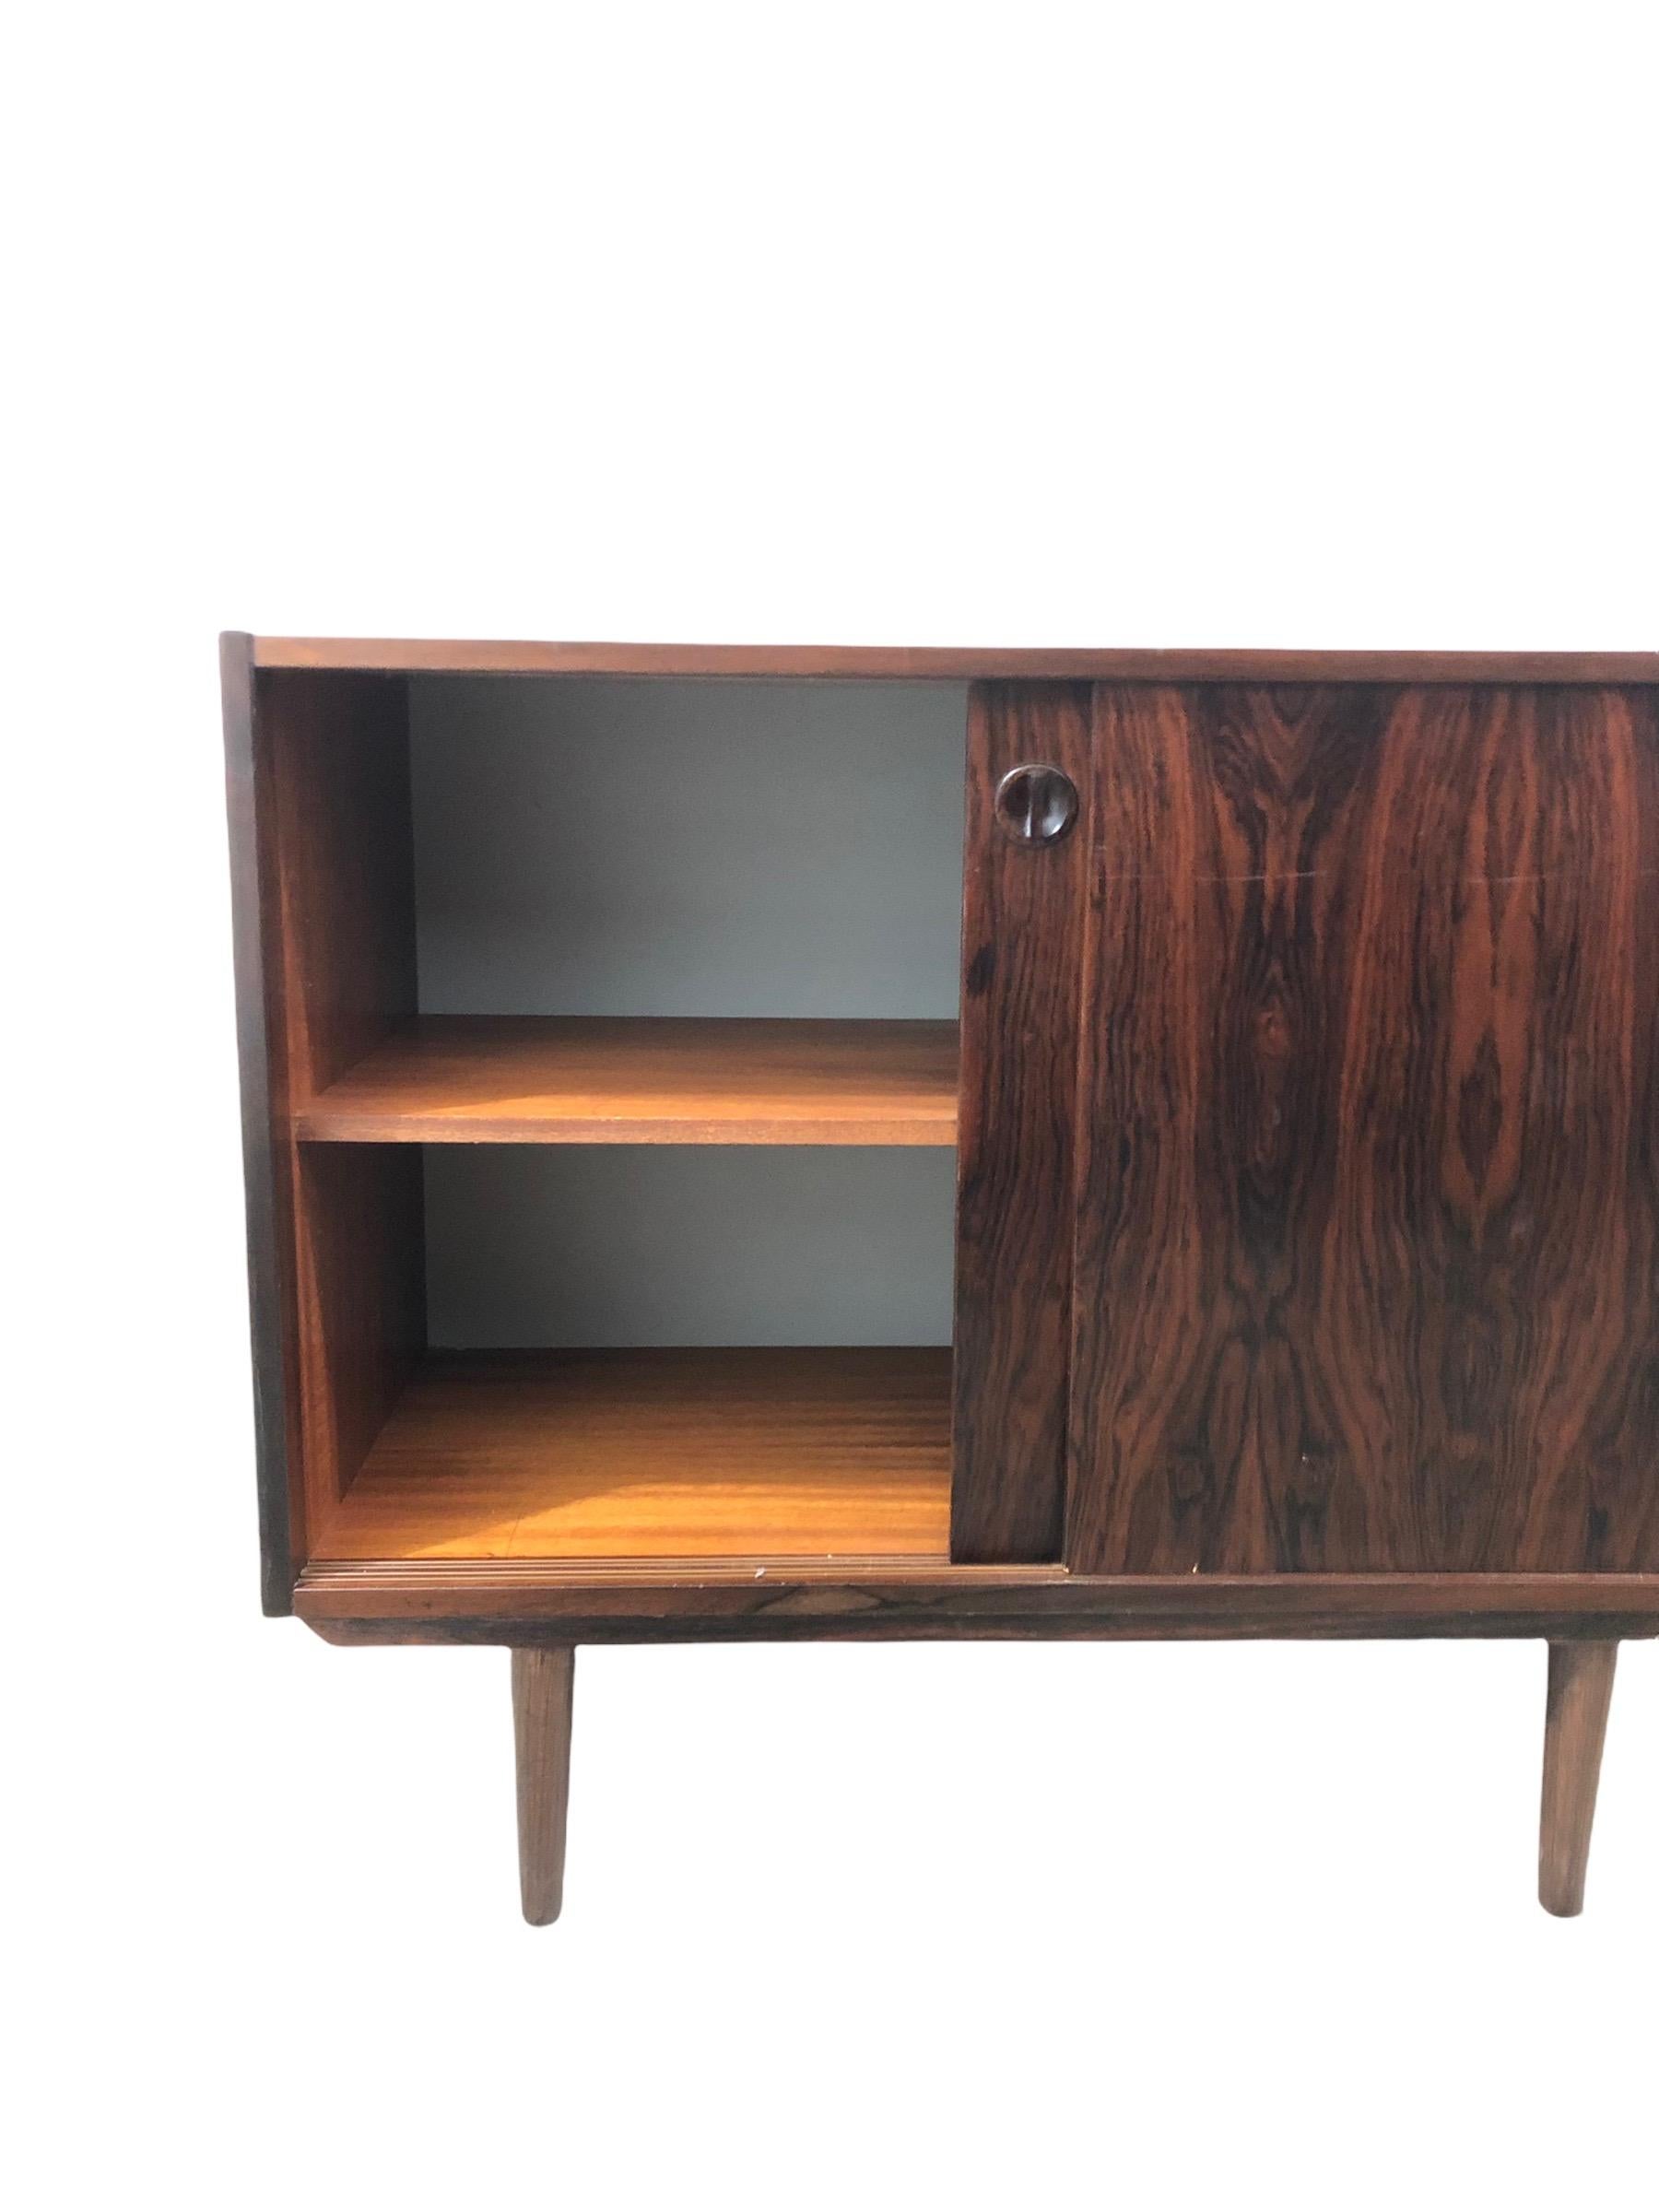 Vintage Danish Mid-Century Modern Record Media Cabinet or Credenza In Good Condition For Sale In Seattle, WA